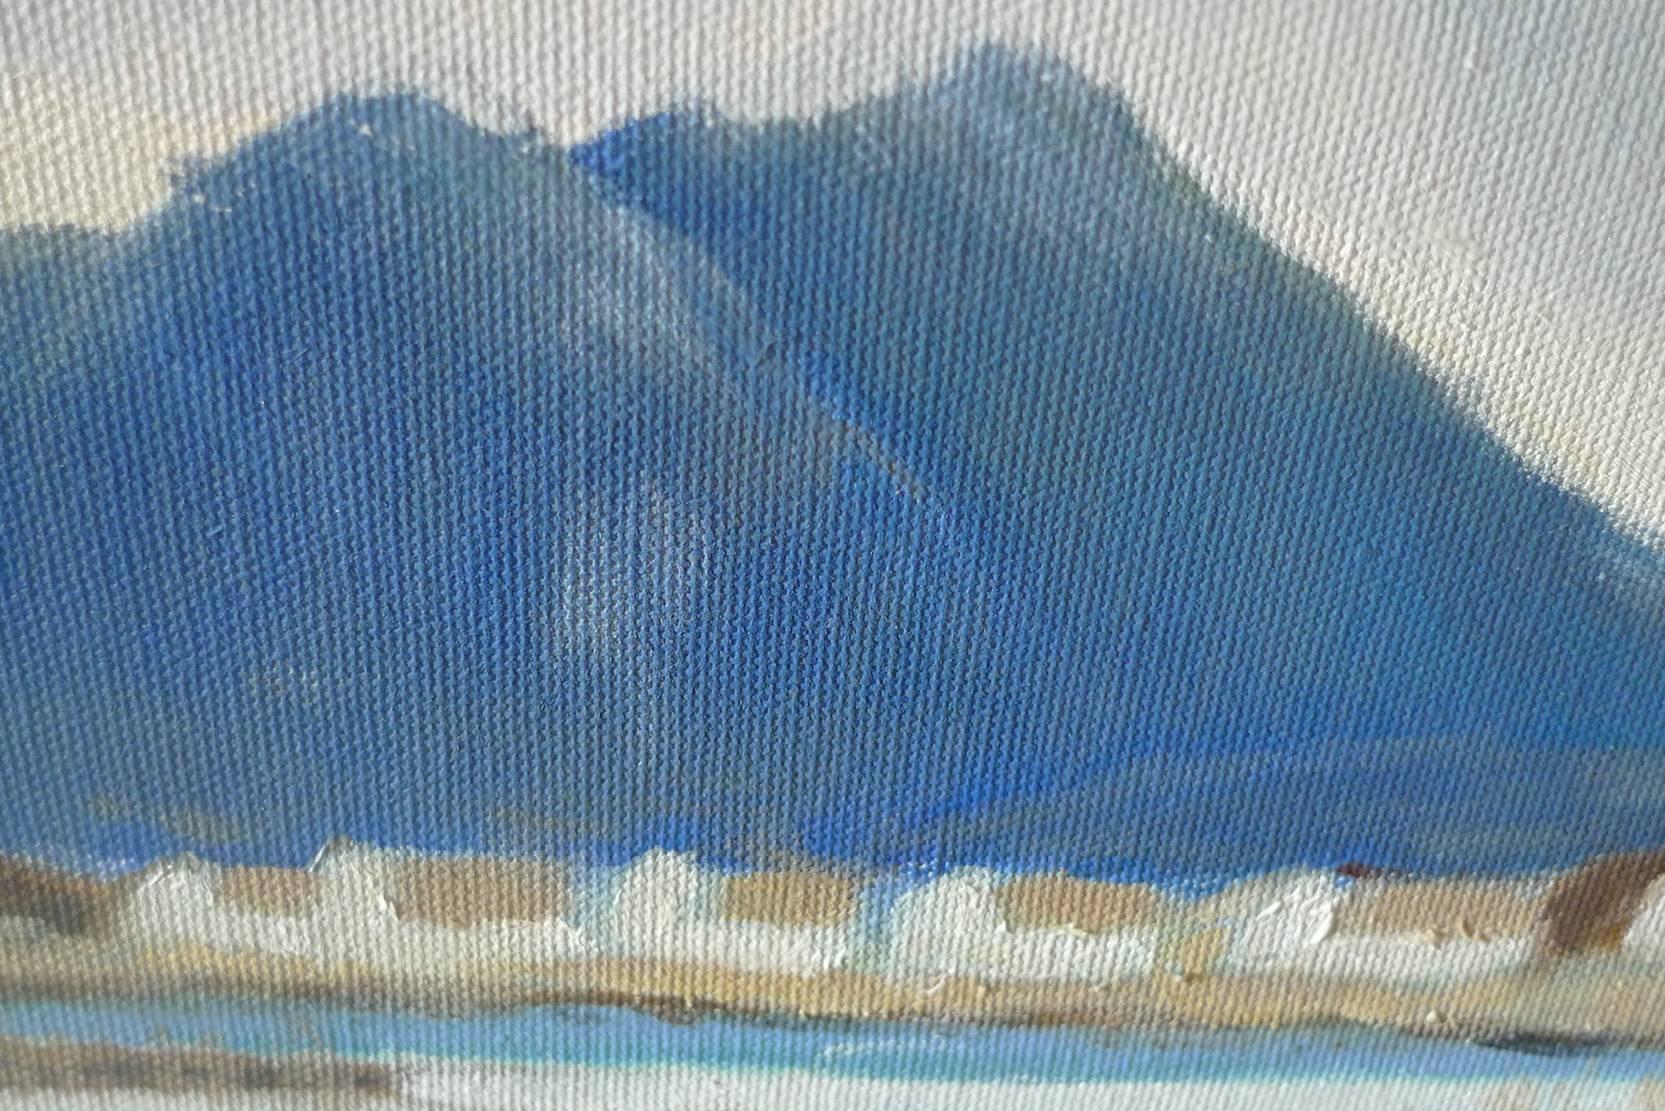 Achill Island Paint on Canvas by B ONeill 2